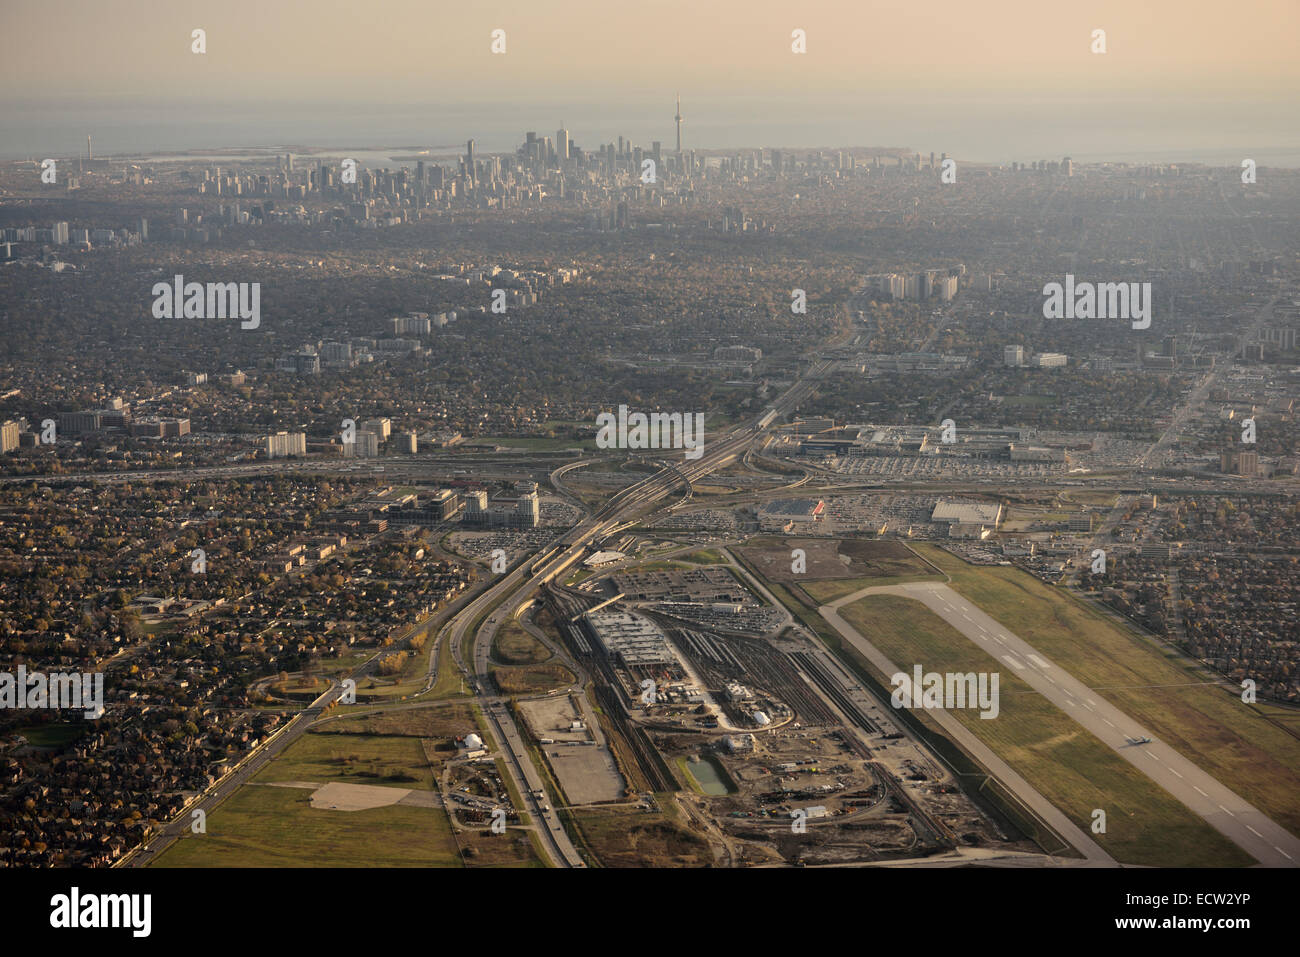 Aerial view of Downsview Airport and Yorkdale Shopping Centre in North York with Toronto city skyline of highrise towers Stock Photo